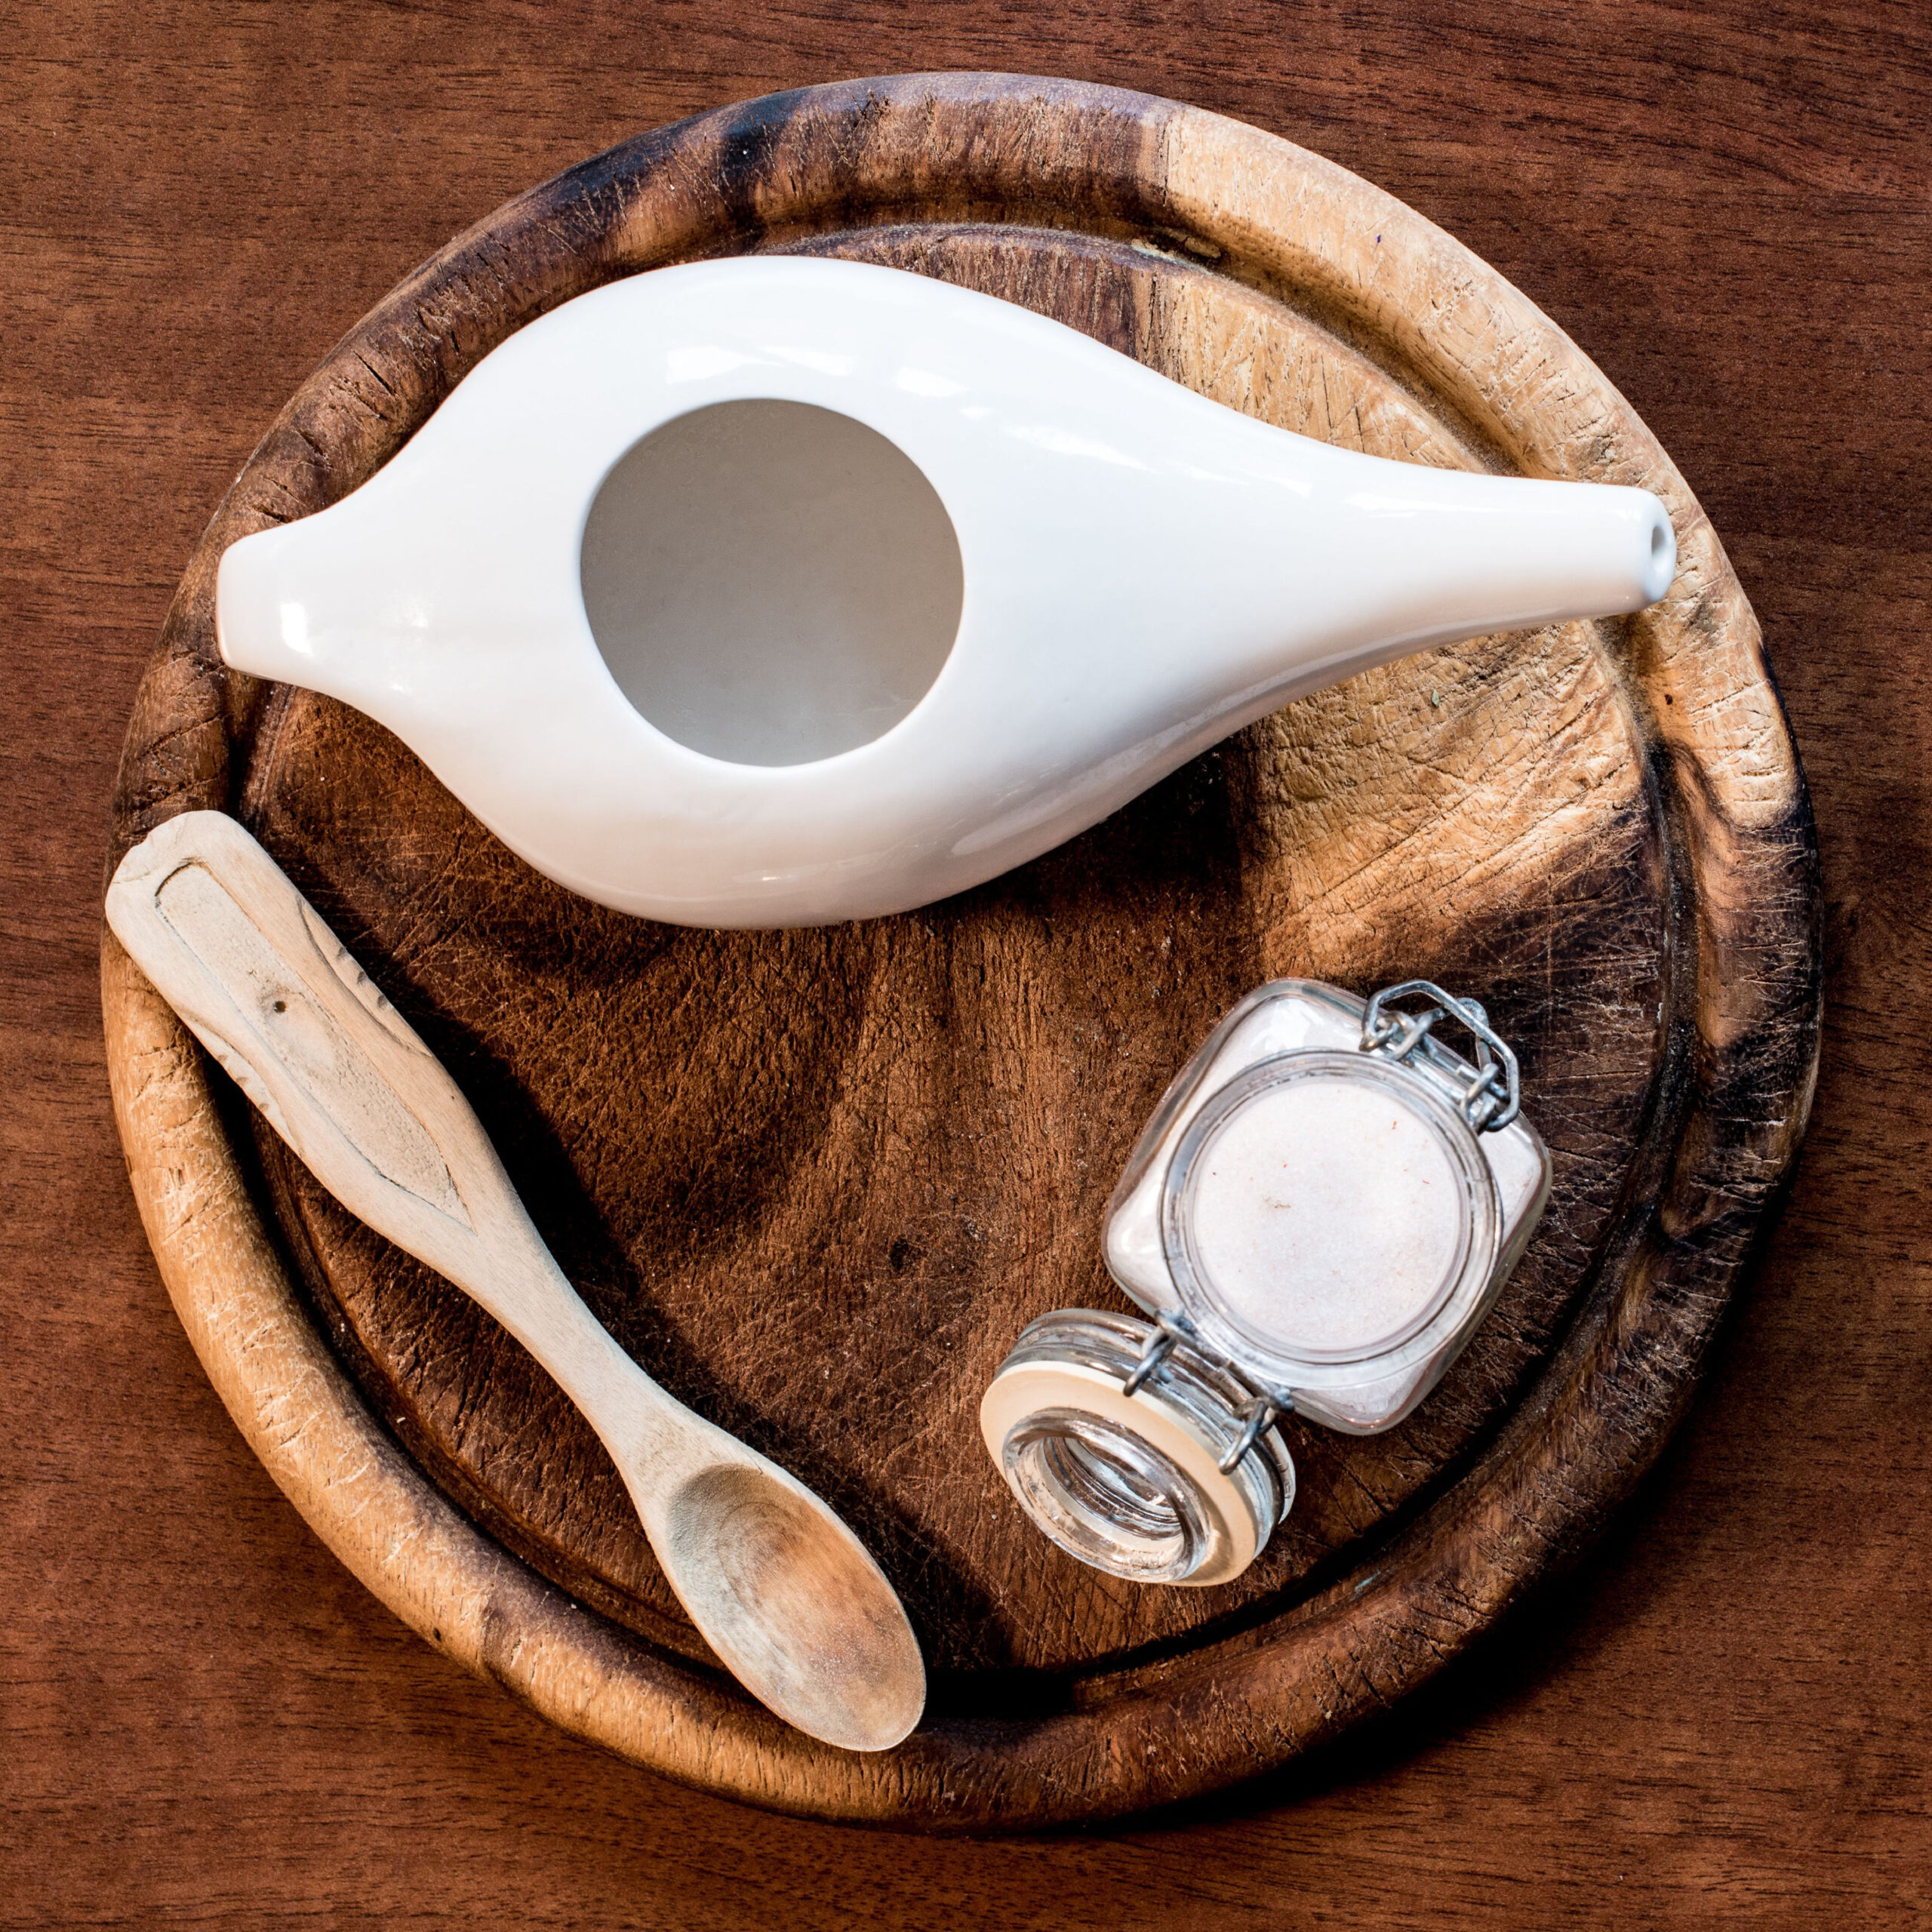 neti pot on wooden tray with small jar of salt and wooden spoon